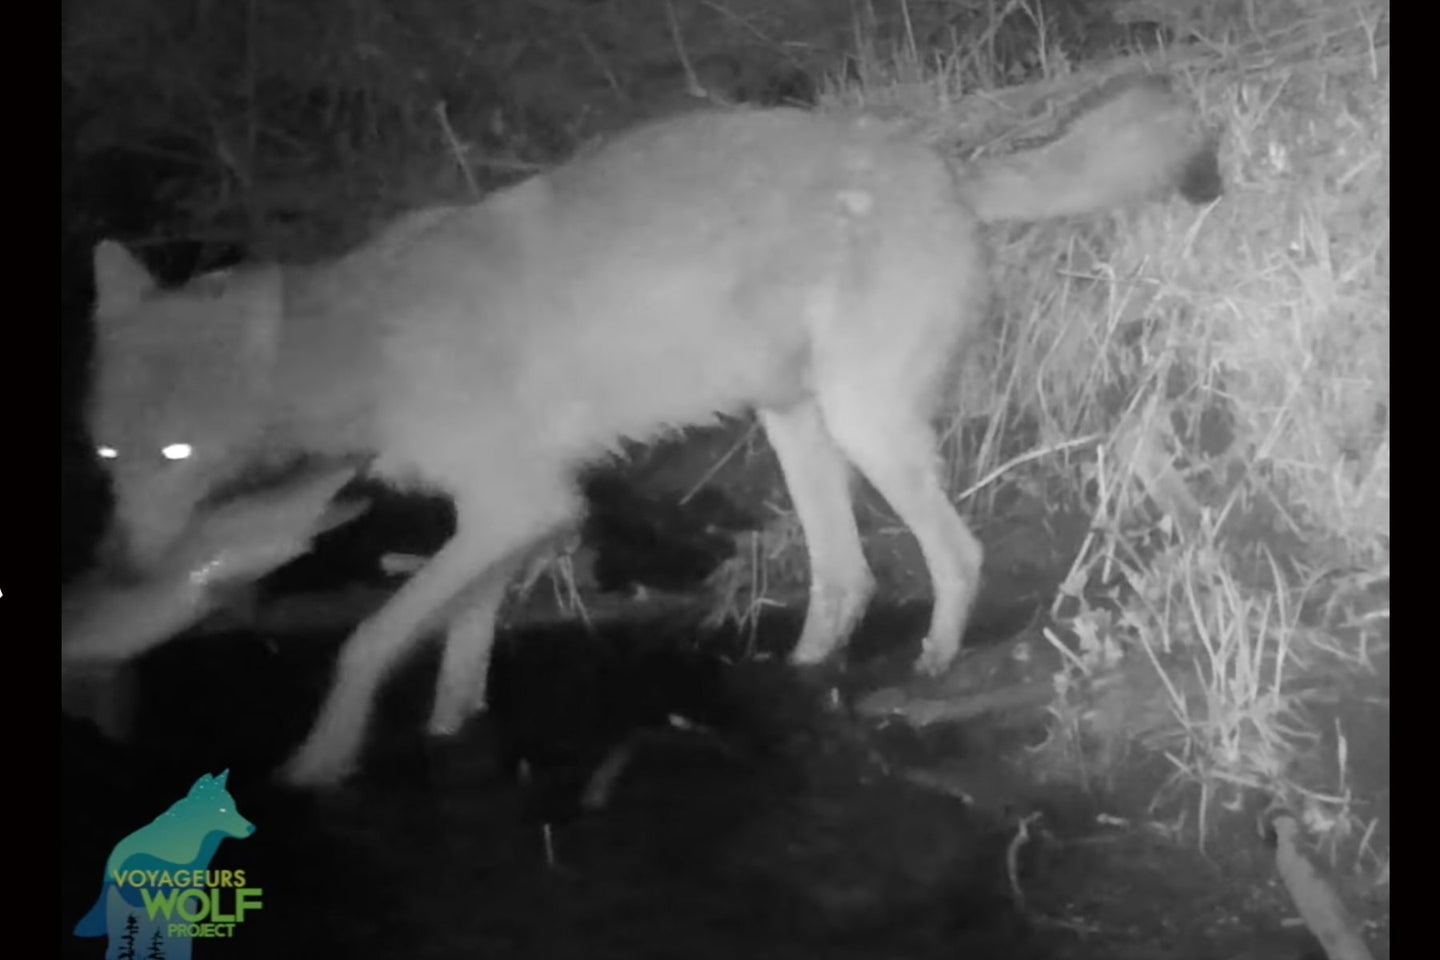 Researchers dubbed the canines in their study "The Fishing Wolves of Voyageurs National Park."